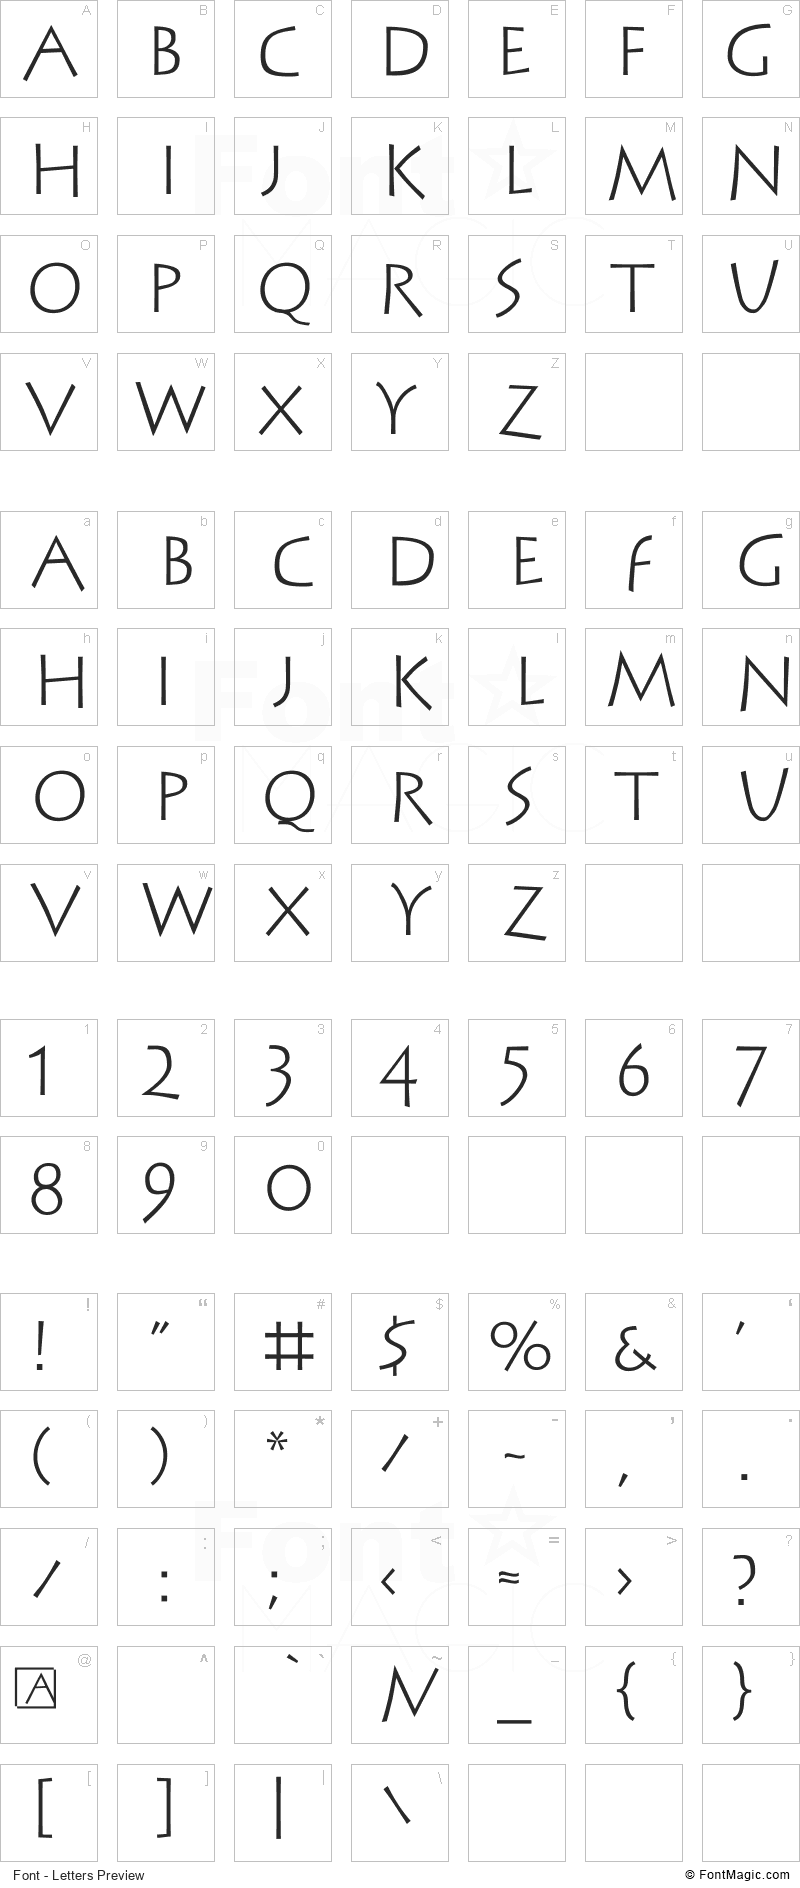 Stein Antik Font - All Latters Preview Chart